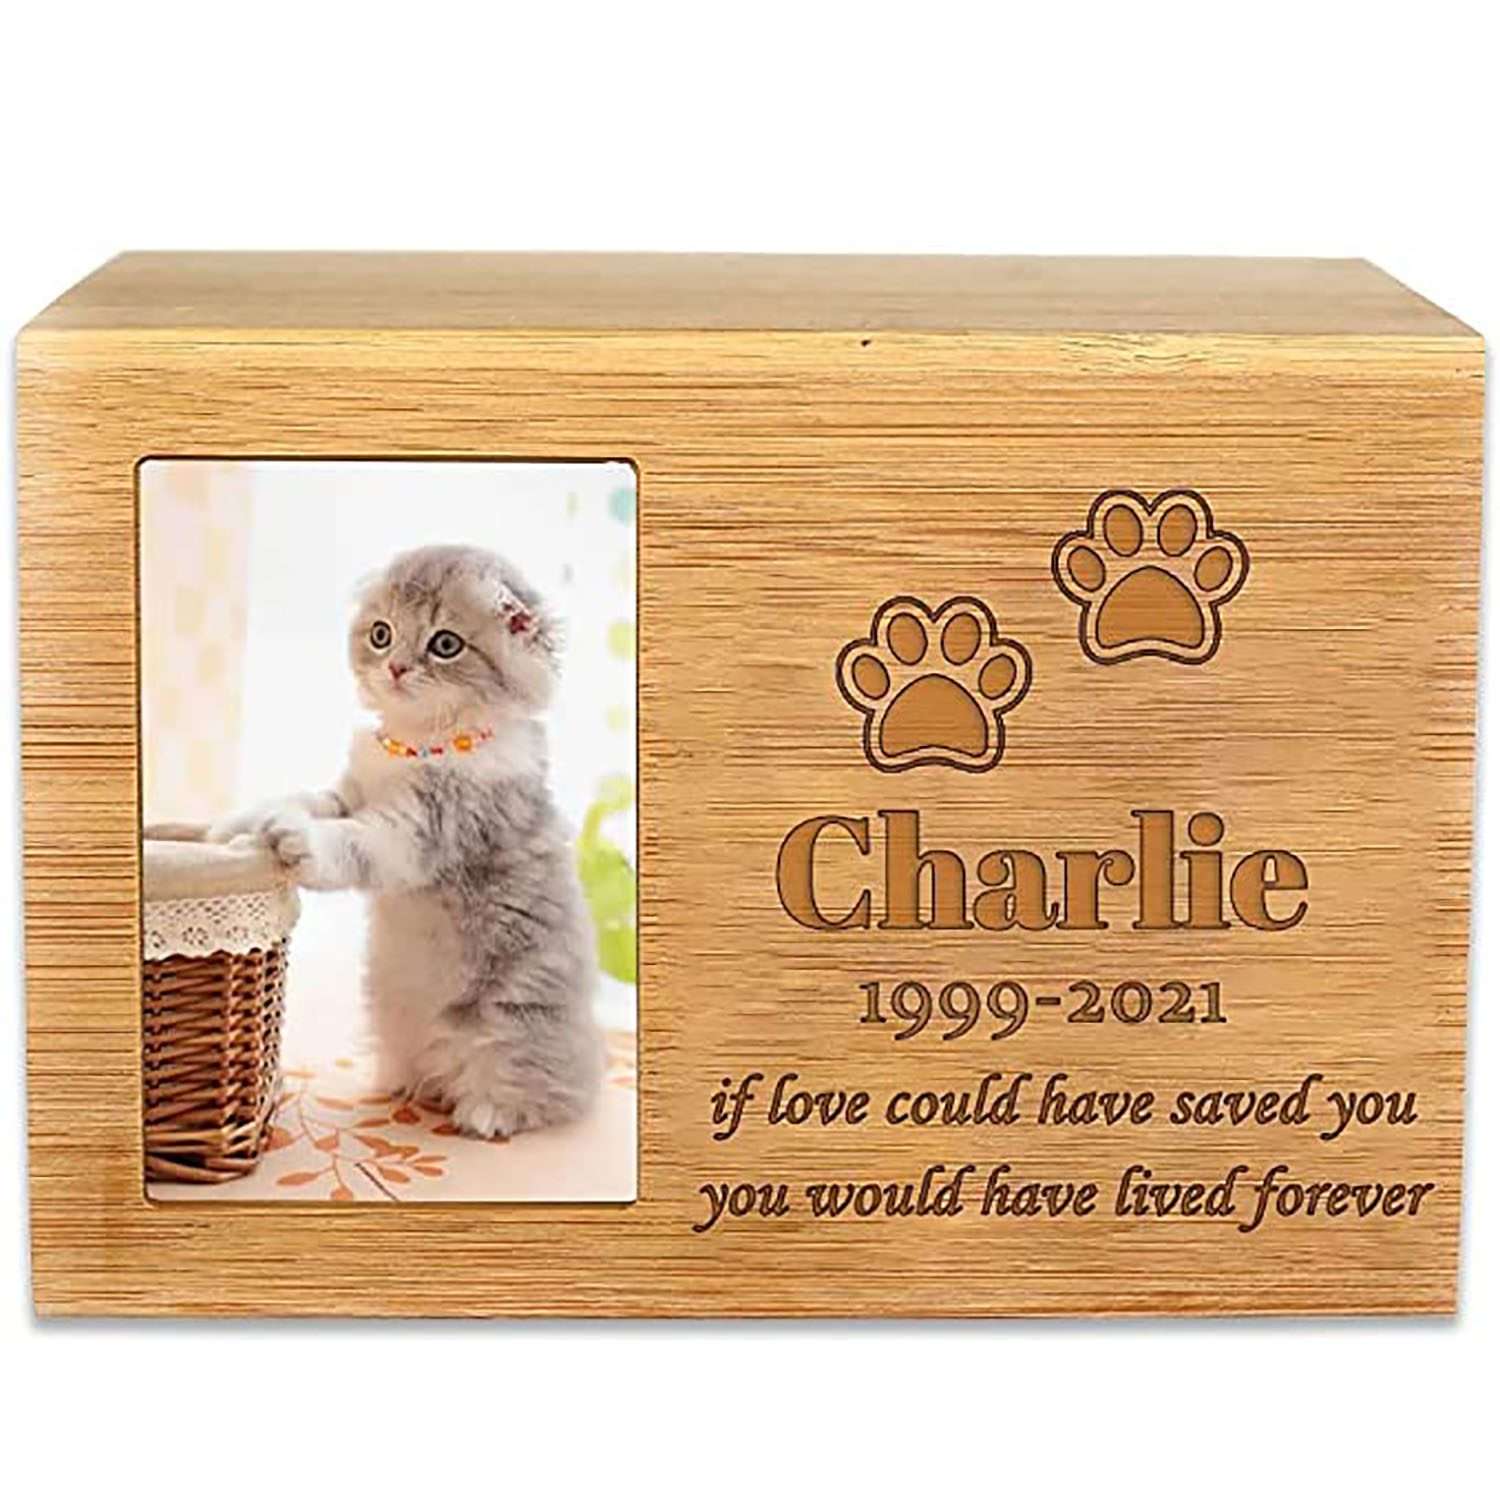 Personalized Cremation Urns for ashes | Premium Wooden Box for pet ashes | Wood Urn Box manufacturer & supplier